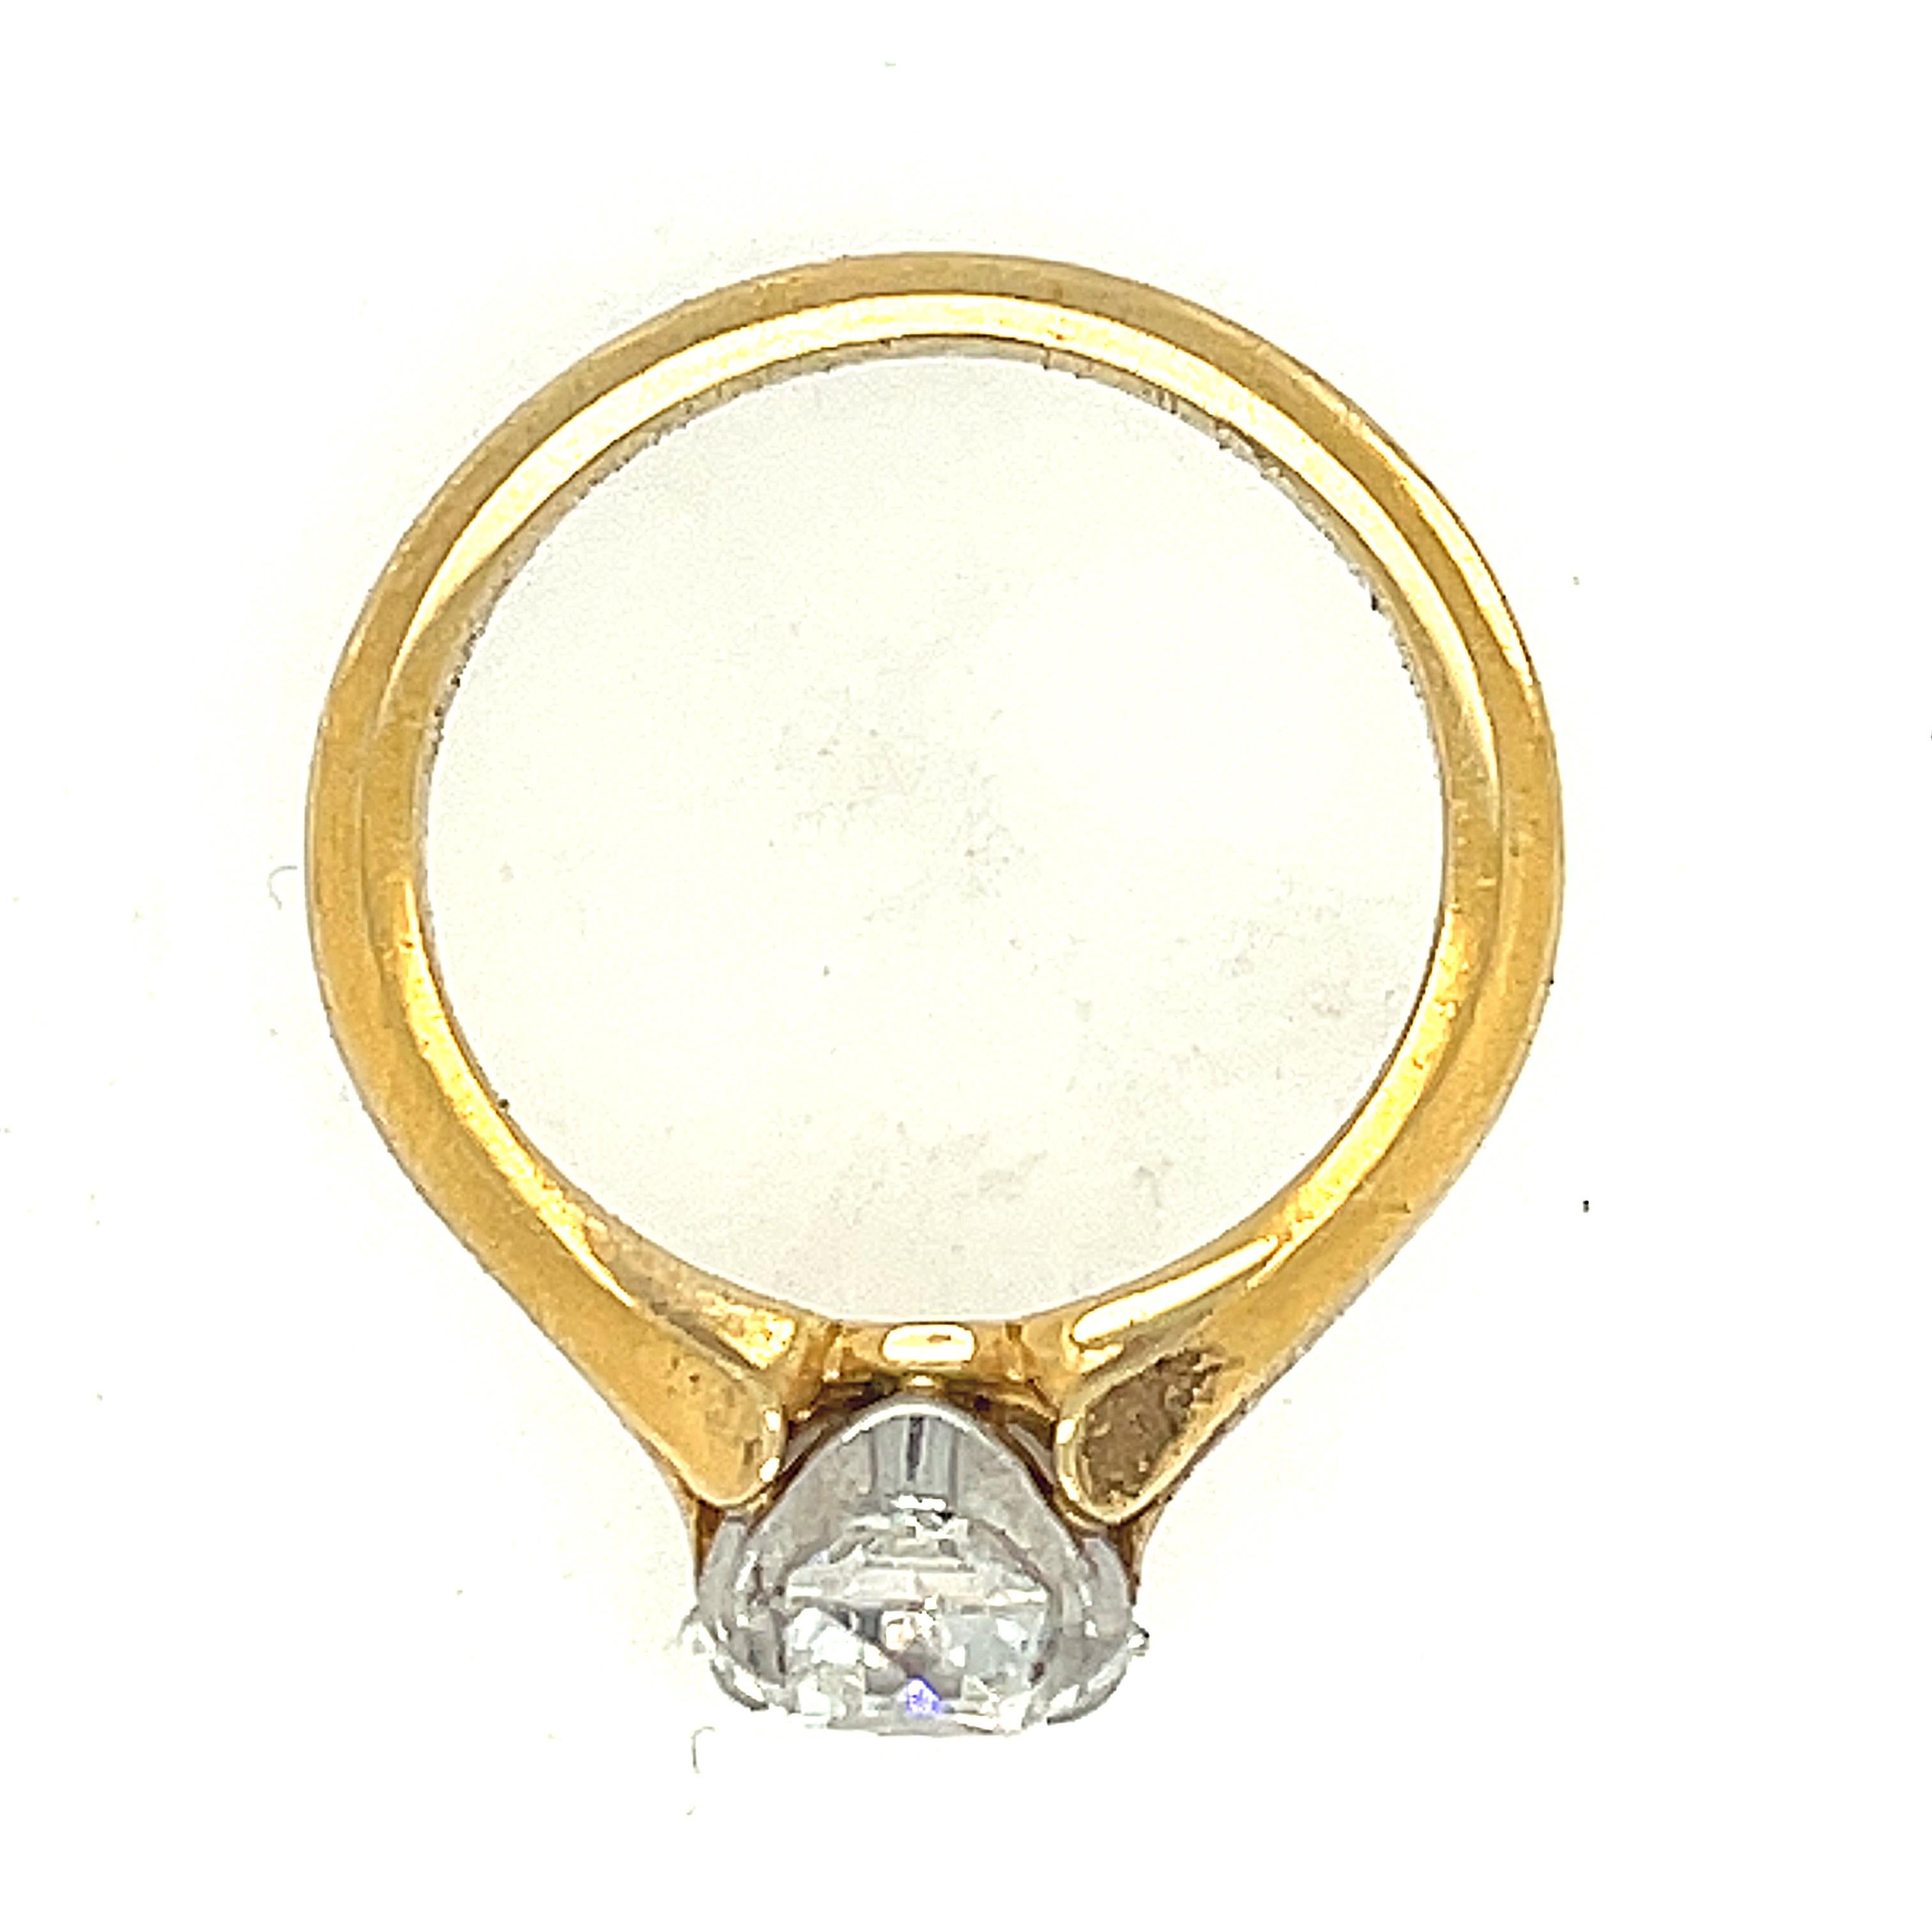 A charming antique cut diamond ring set in an 18k mounting by McTeigue & McClelland, circa 2000. The ring centers on a diamond weighing 1.43 carats and is certified by the GIA as an F Color and VS1 clarity. The diamond is set in platinum, however